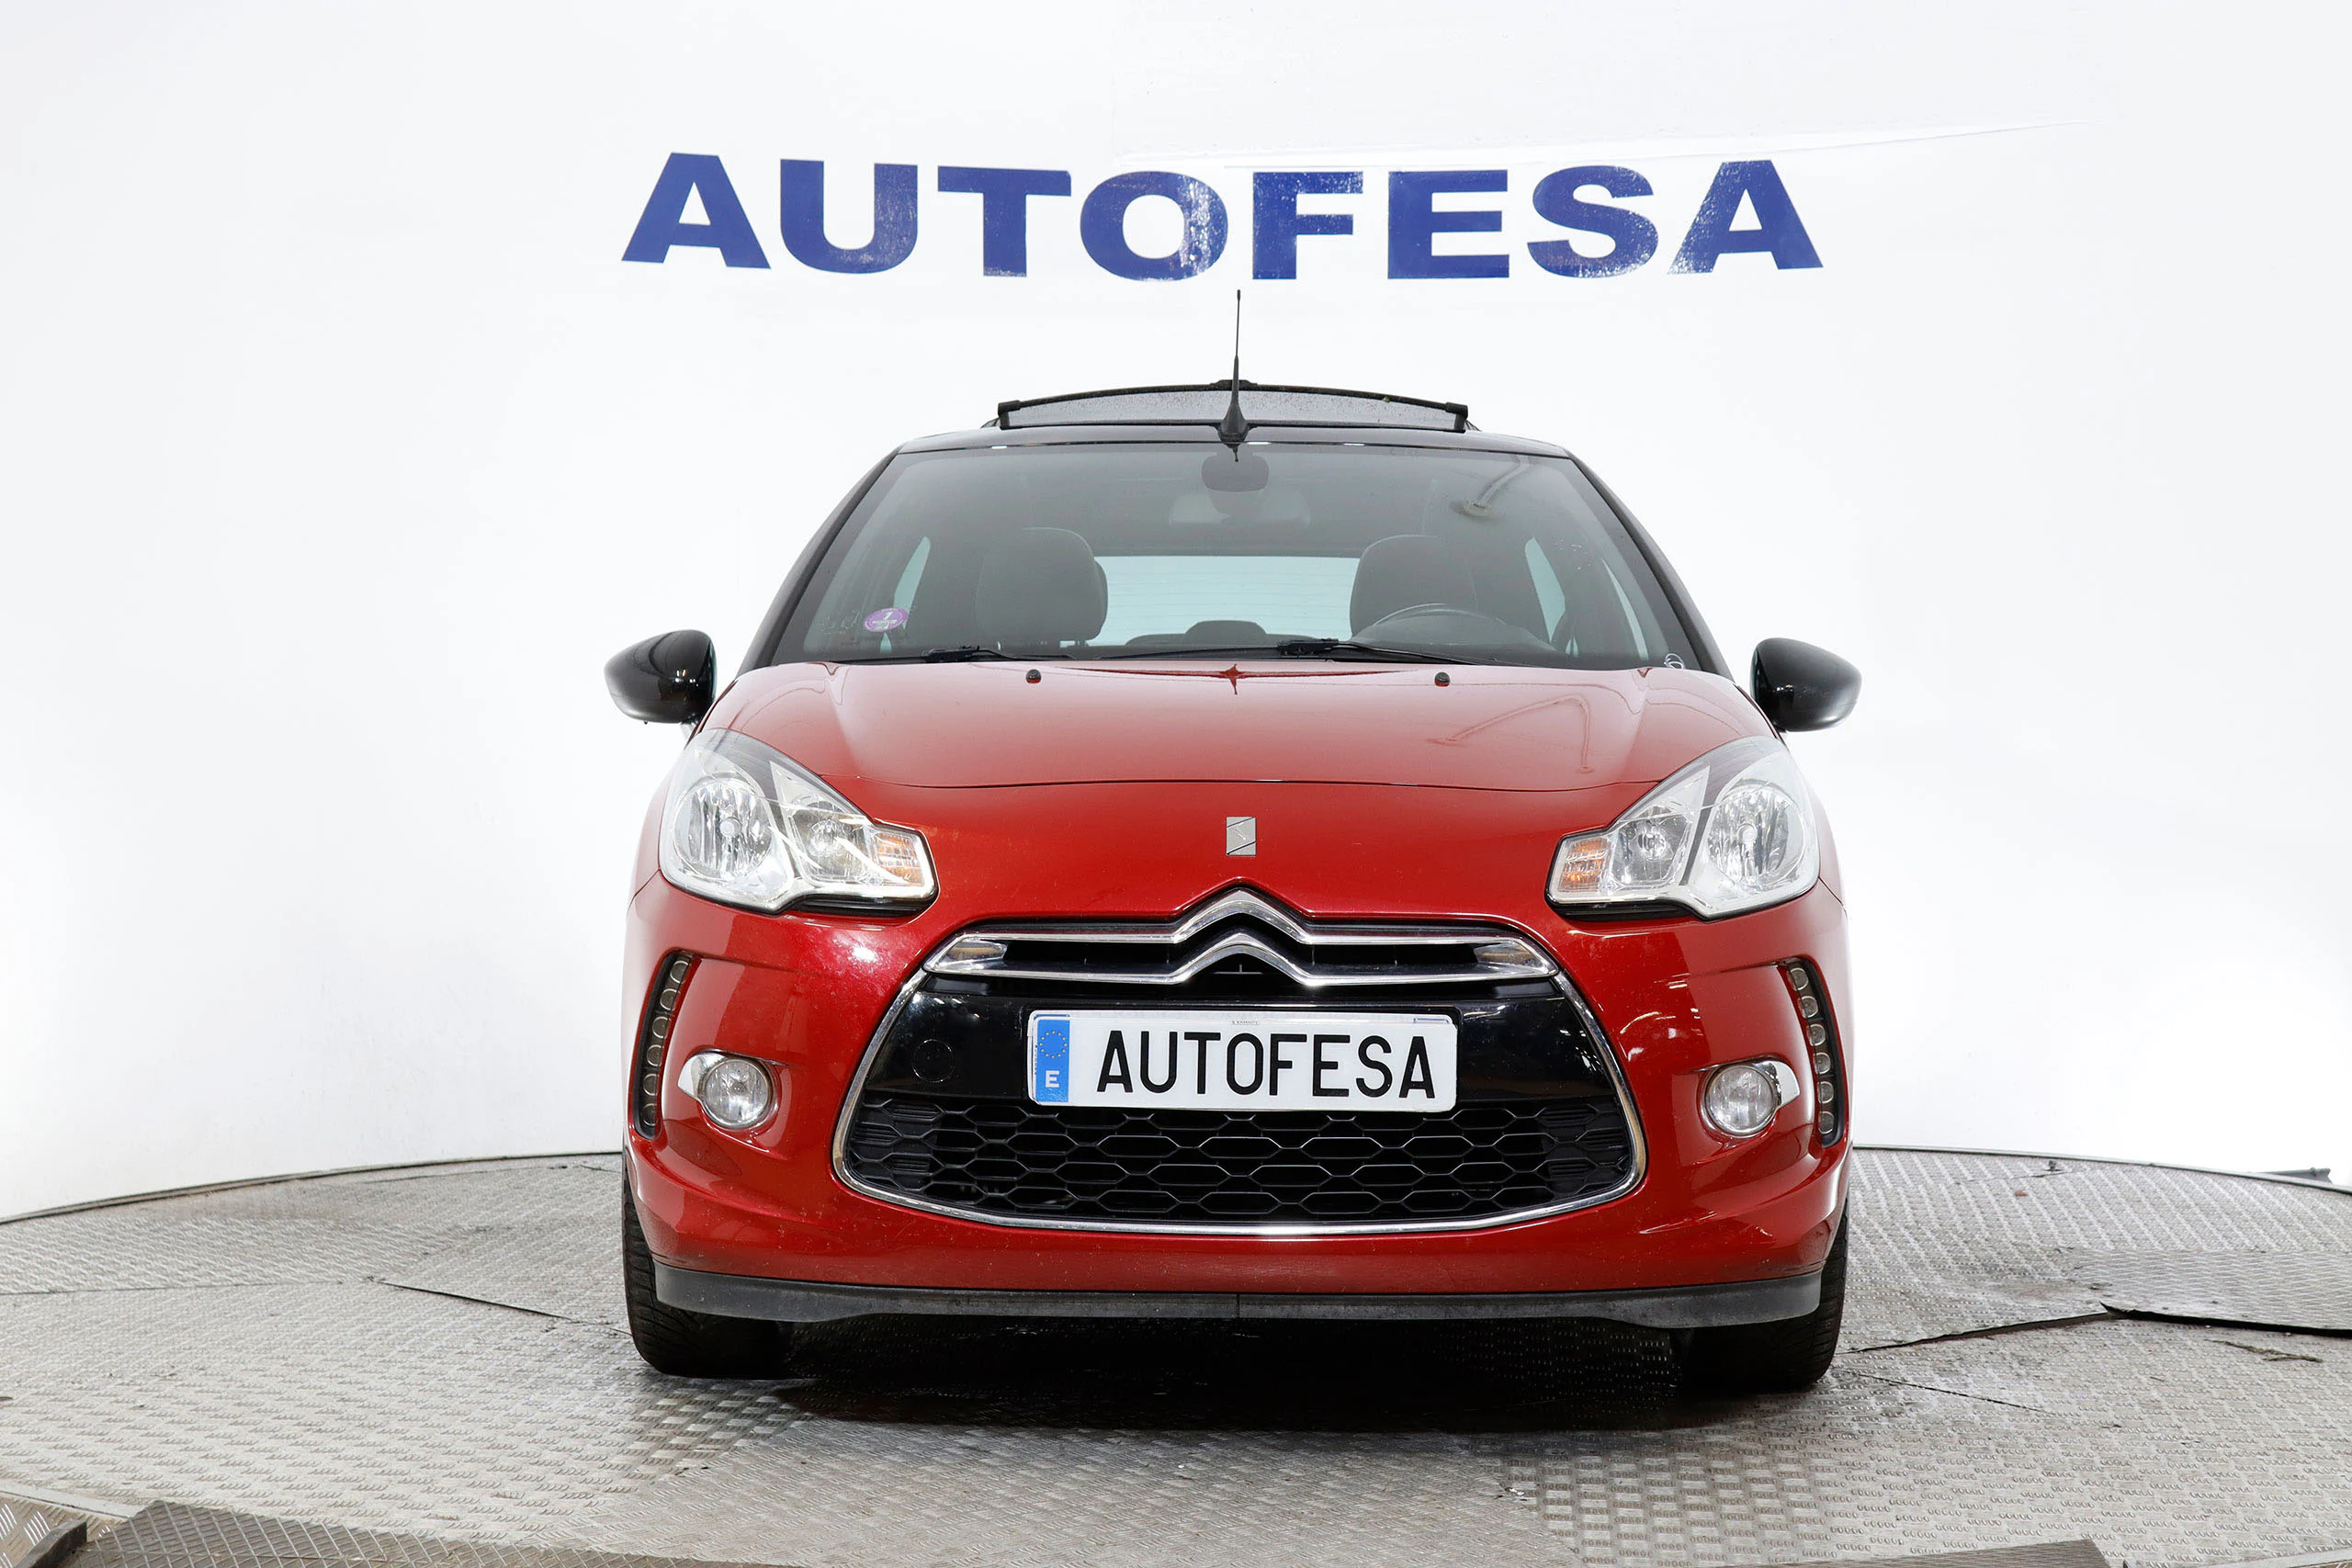 DS DS 3 1.2 CABRIO 110cv SO CHIC 3P S/S # NAVY, PARKTRONIC - Foto 2